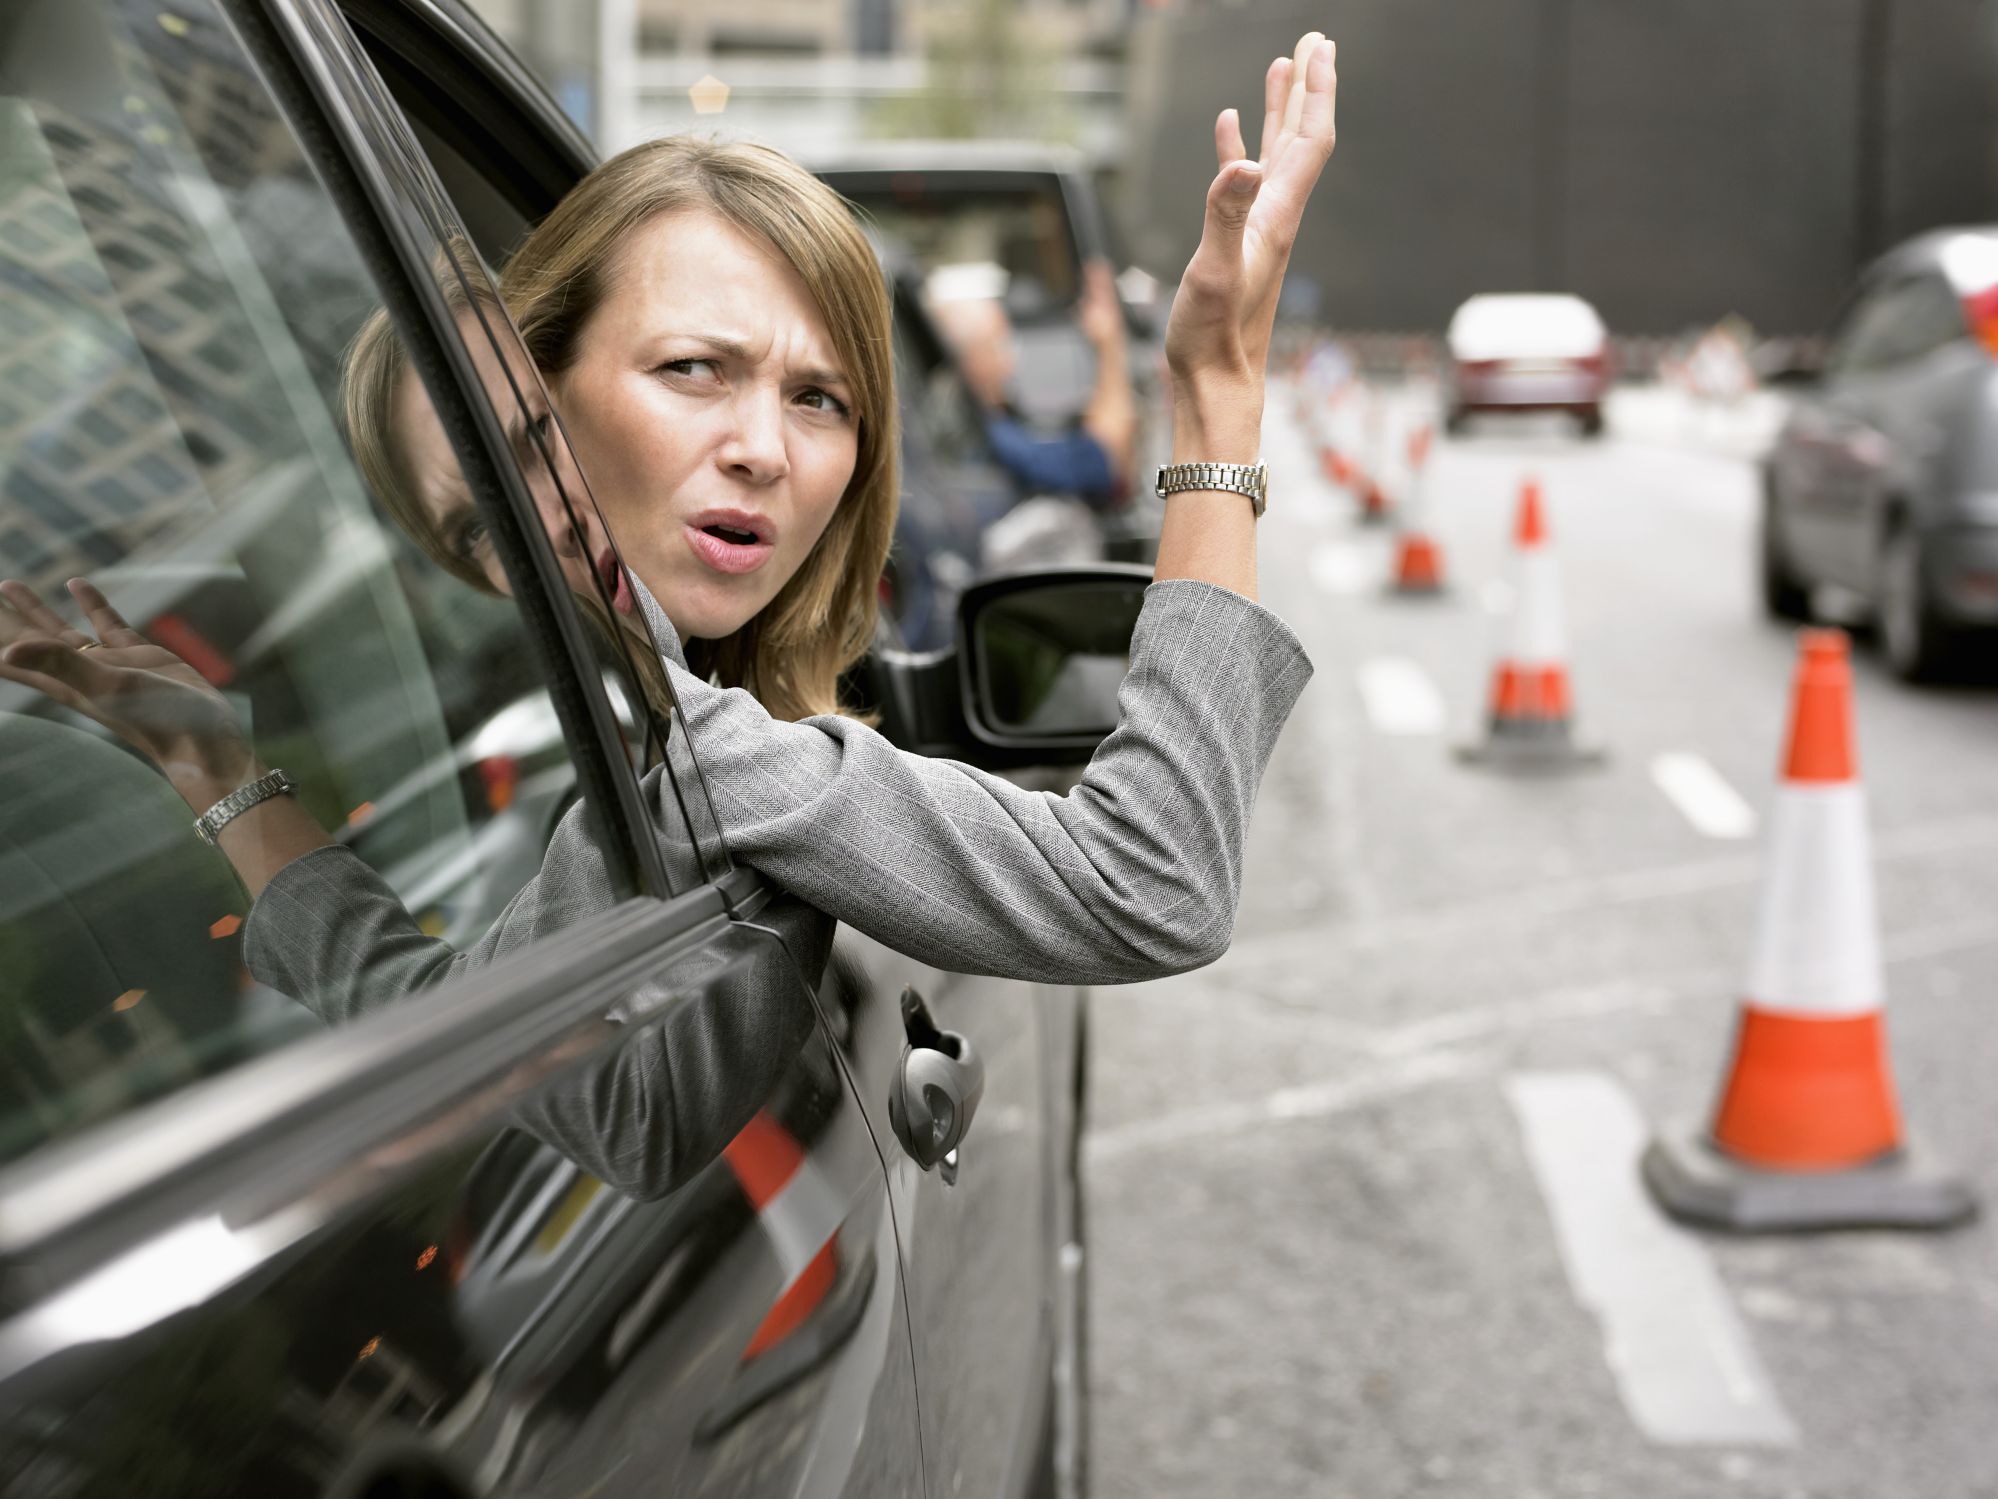 Photo of a frustrated driver performing an angry, aggressive, or rude gesture, with accompanying facial expression or anger or hostility or threat